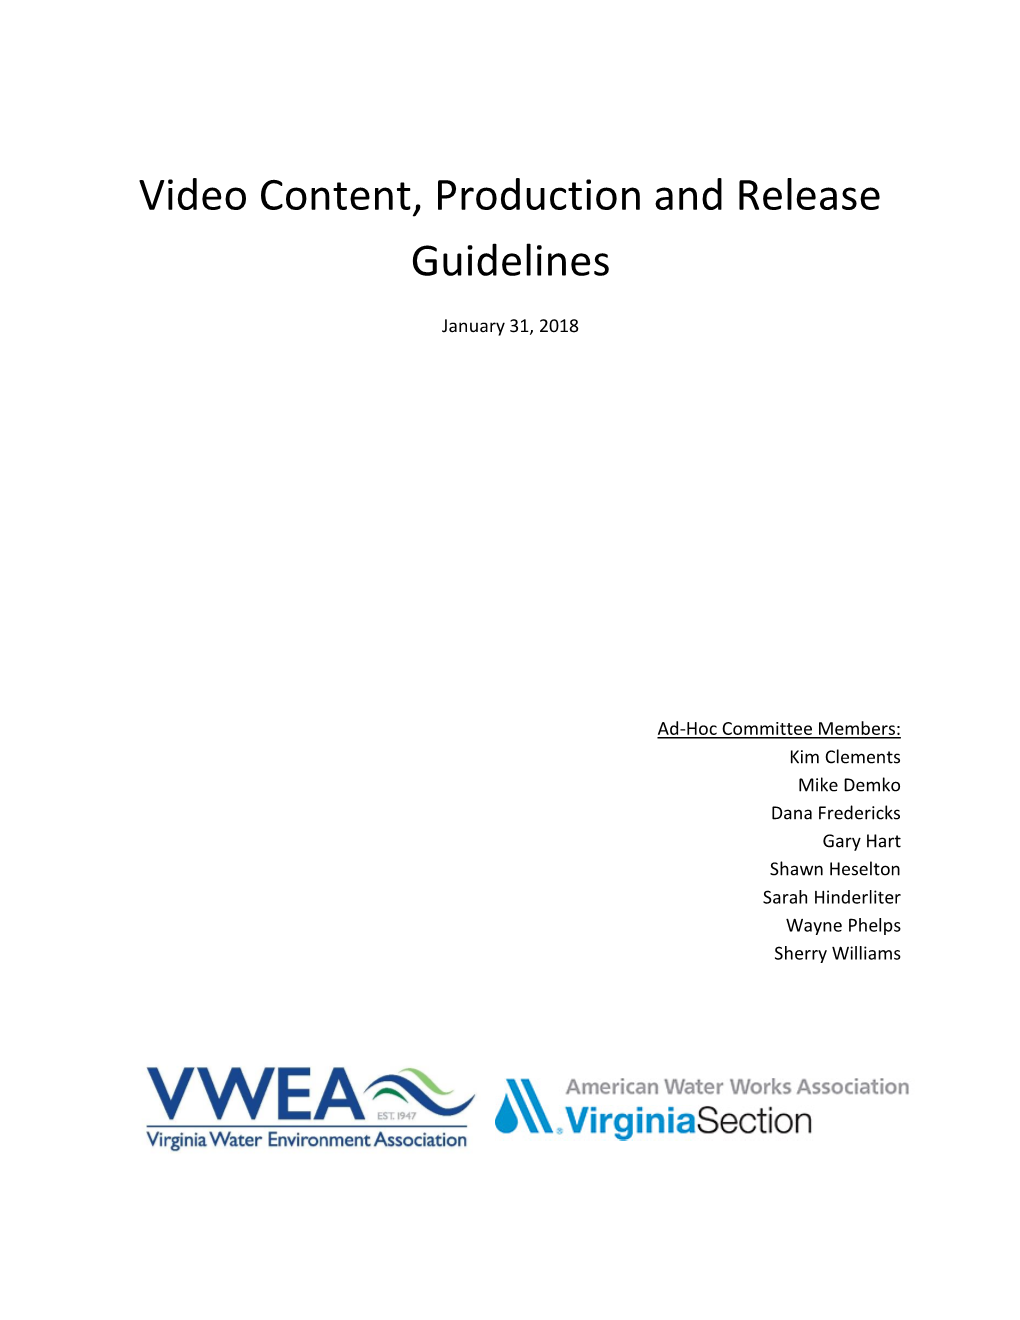 Video Content, Production and Release Guidelines